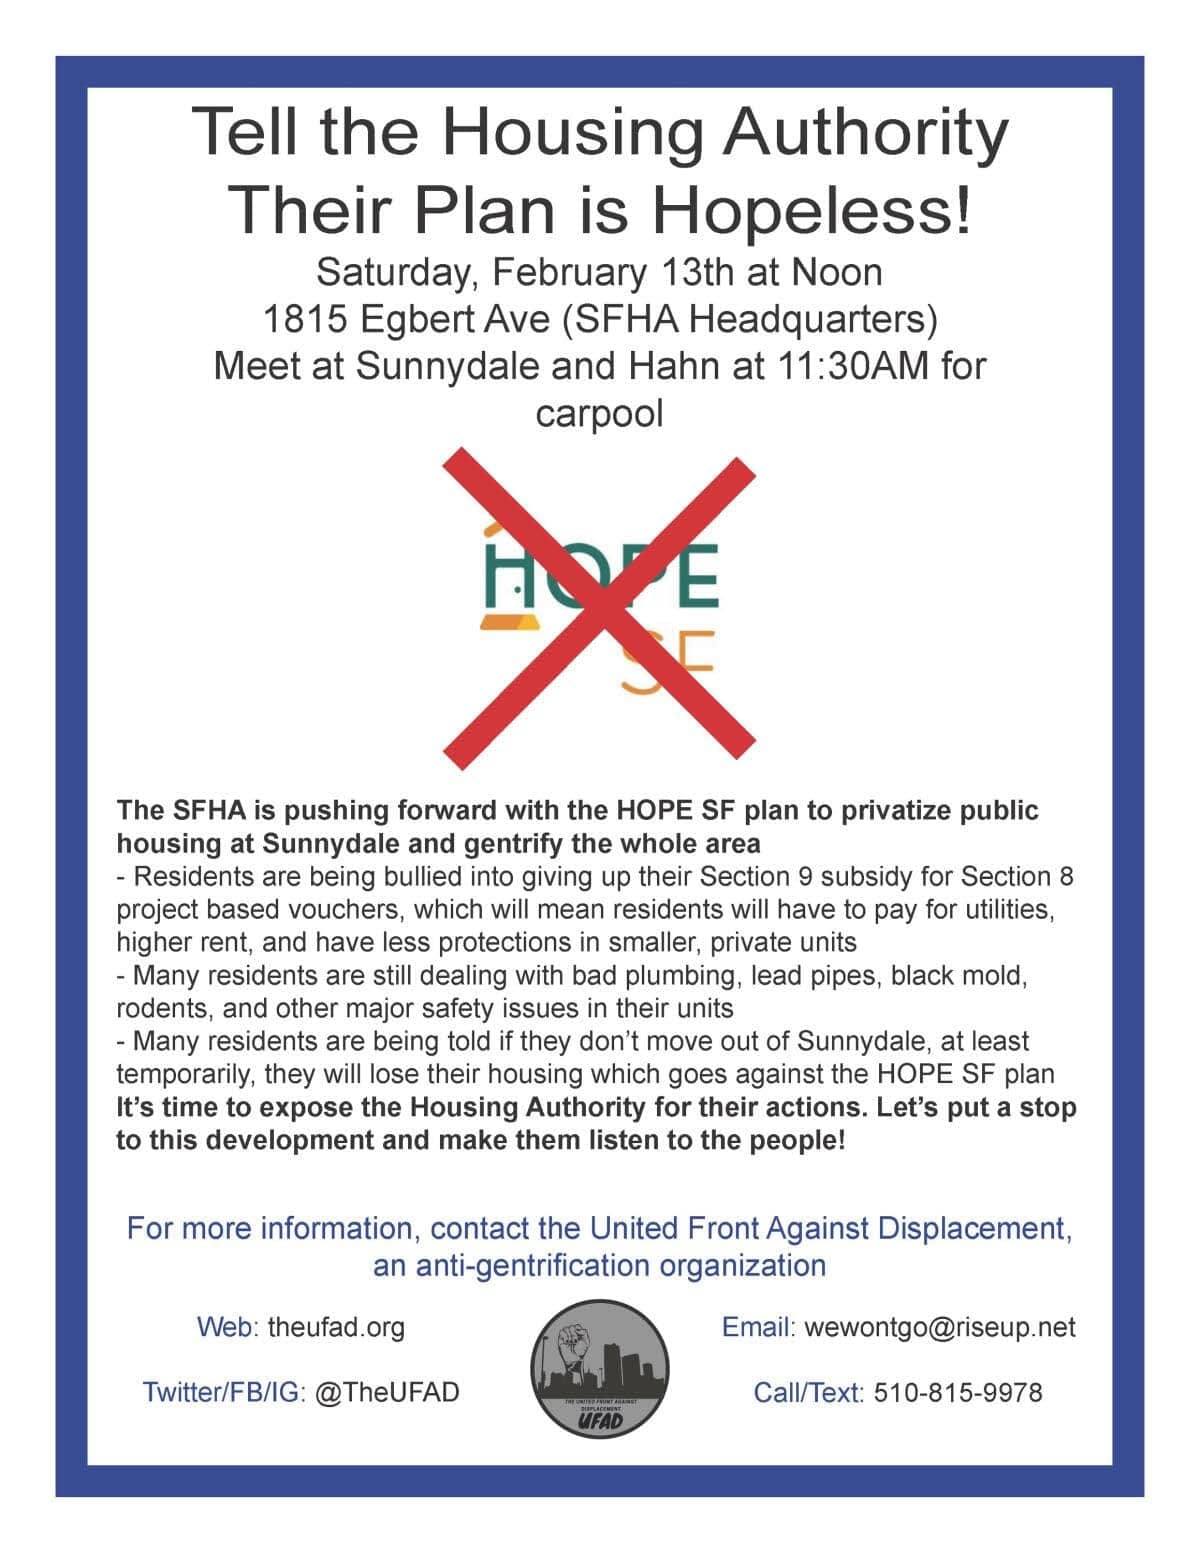 Tell-the-Housing-Authority-Their-Plan-Is-Hopeless-rally-flier-for-Sunnydale-021321, Sunnydale residents organize protest against SF Housing Authority for Saturday, Feb. 13, 2021, Local News & Views 